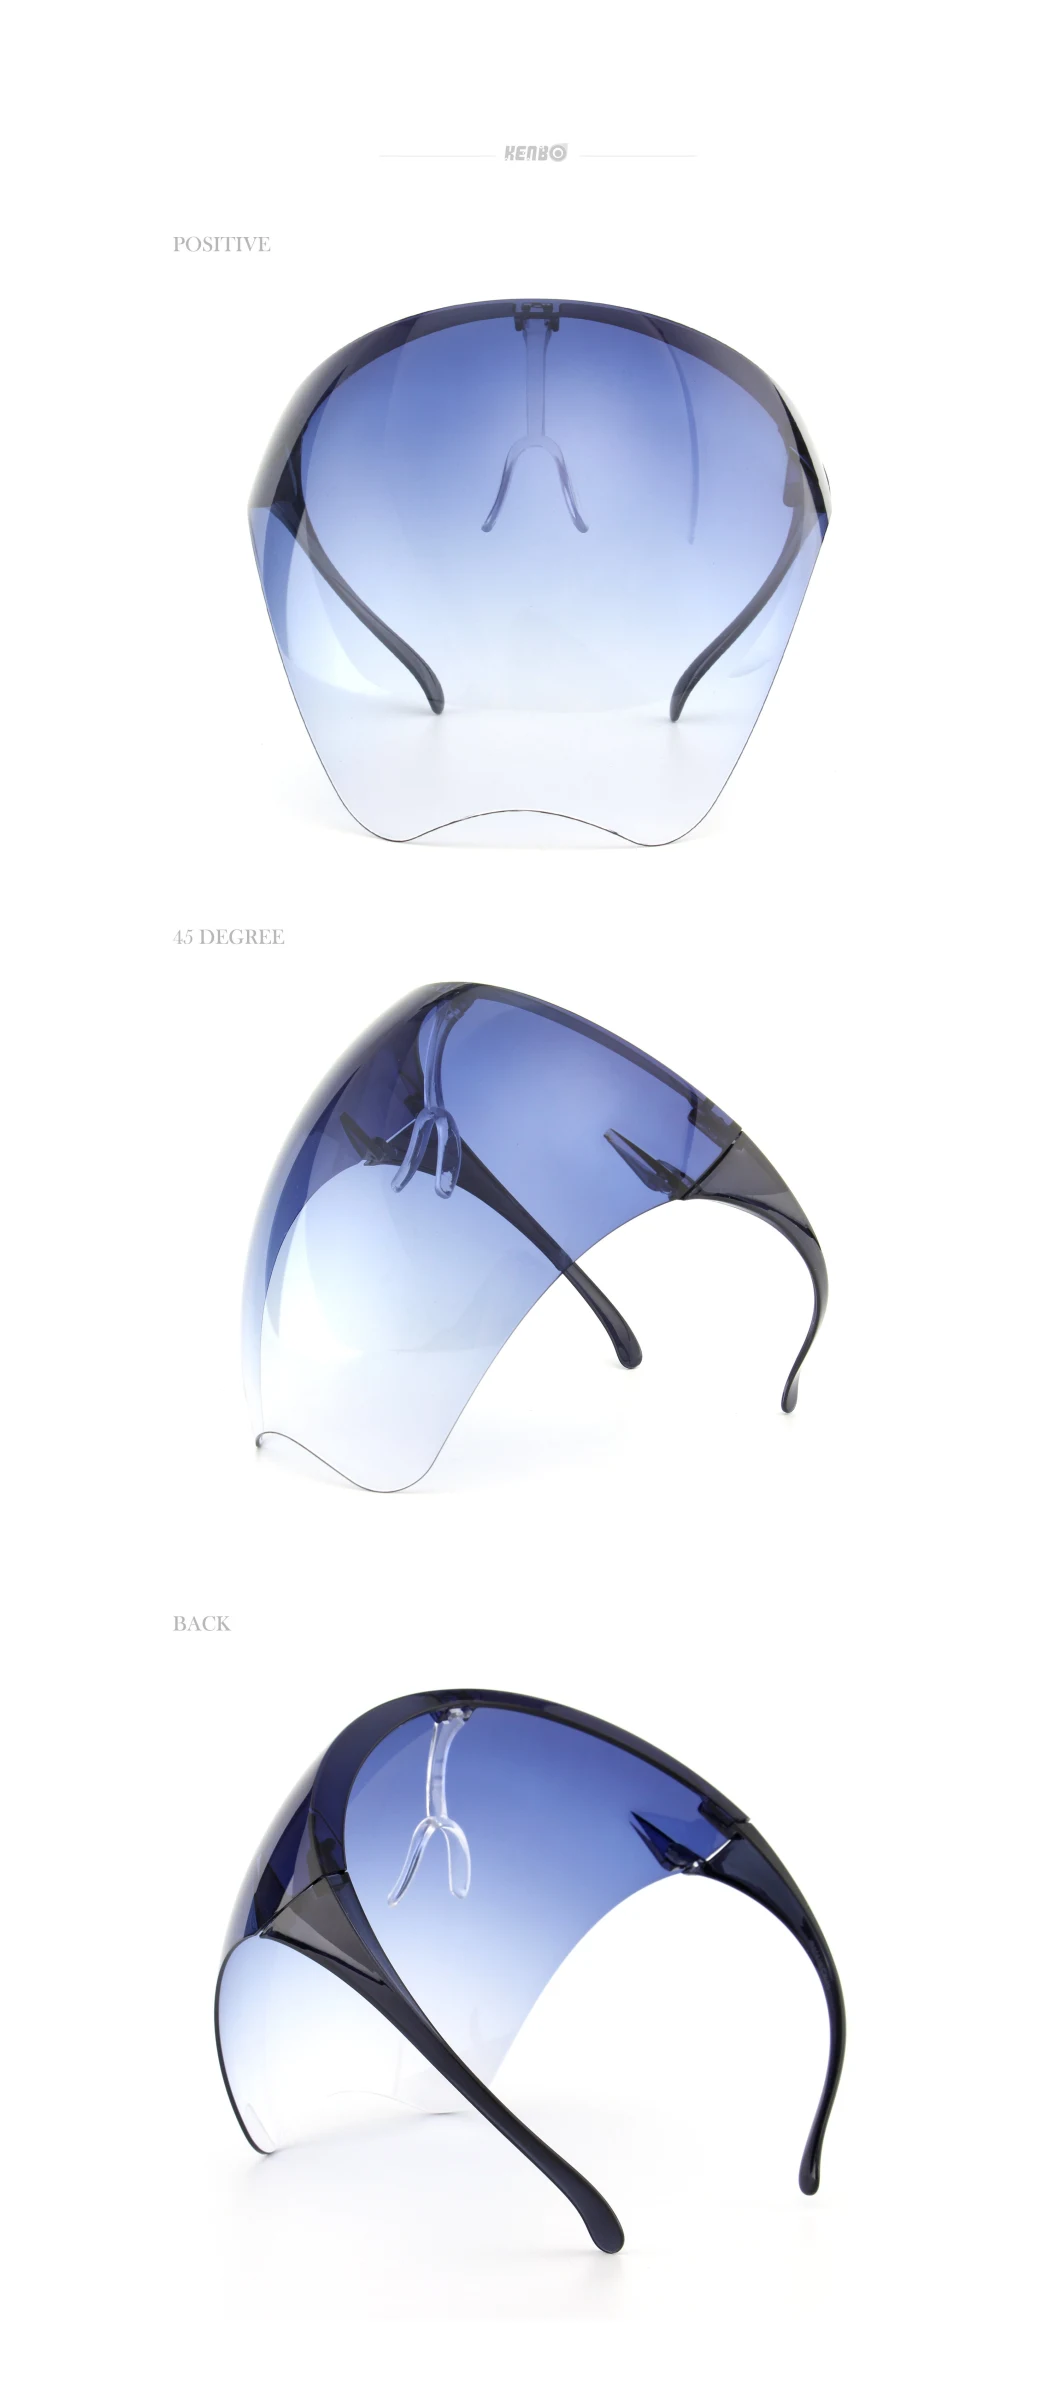 Super Hot Colorful Face Shield Antifoggy, Water Proof Safety Glasses Sunglasses, Protective Glasses